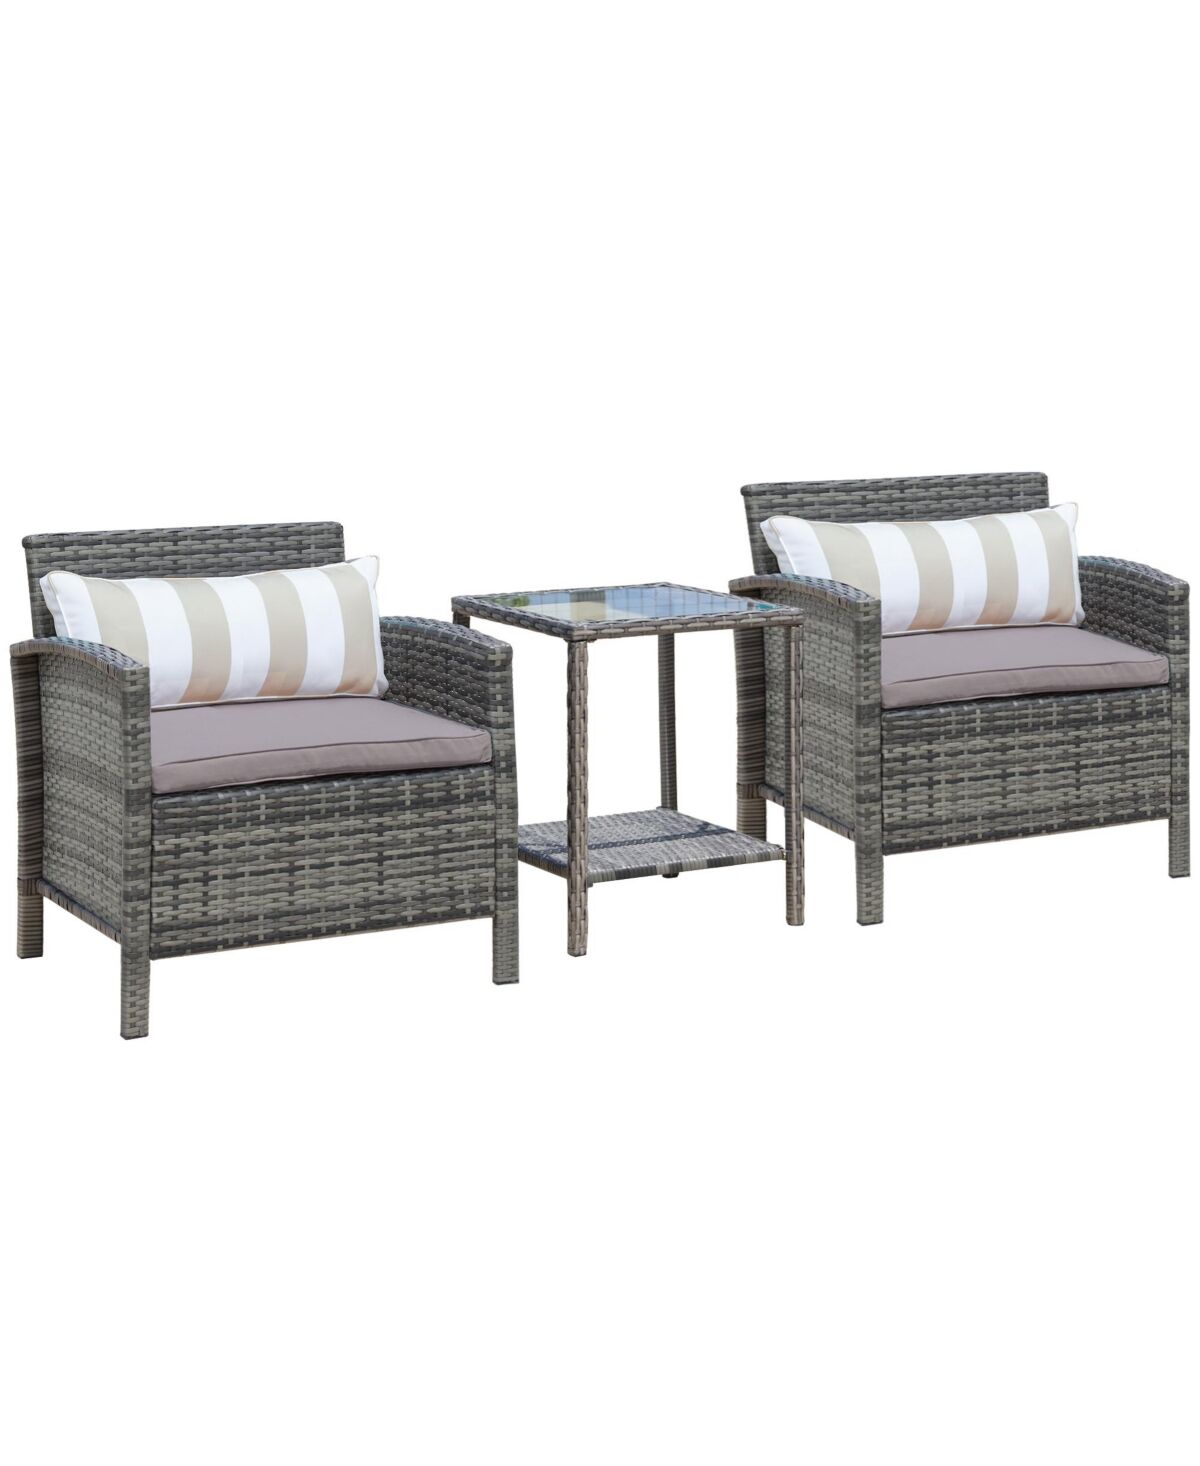 Outsunny Patio Porch Furniture Set 3 Piece Pe Rattan Wicker Chairs with 2-Tier Shelf Table, Arm Rests, Cushions, Pillows, Tempered Glass Tabletop, Con